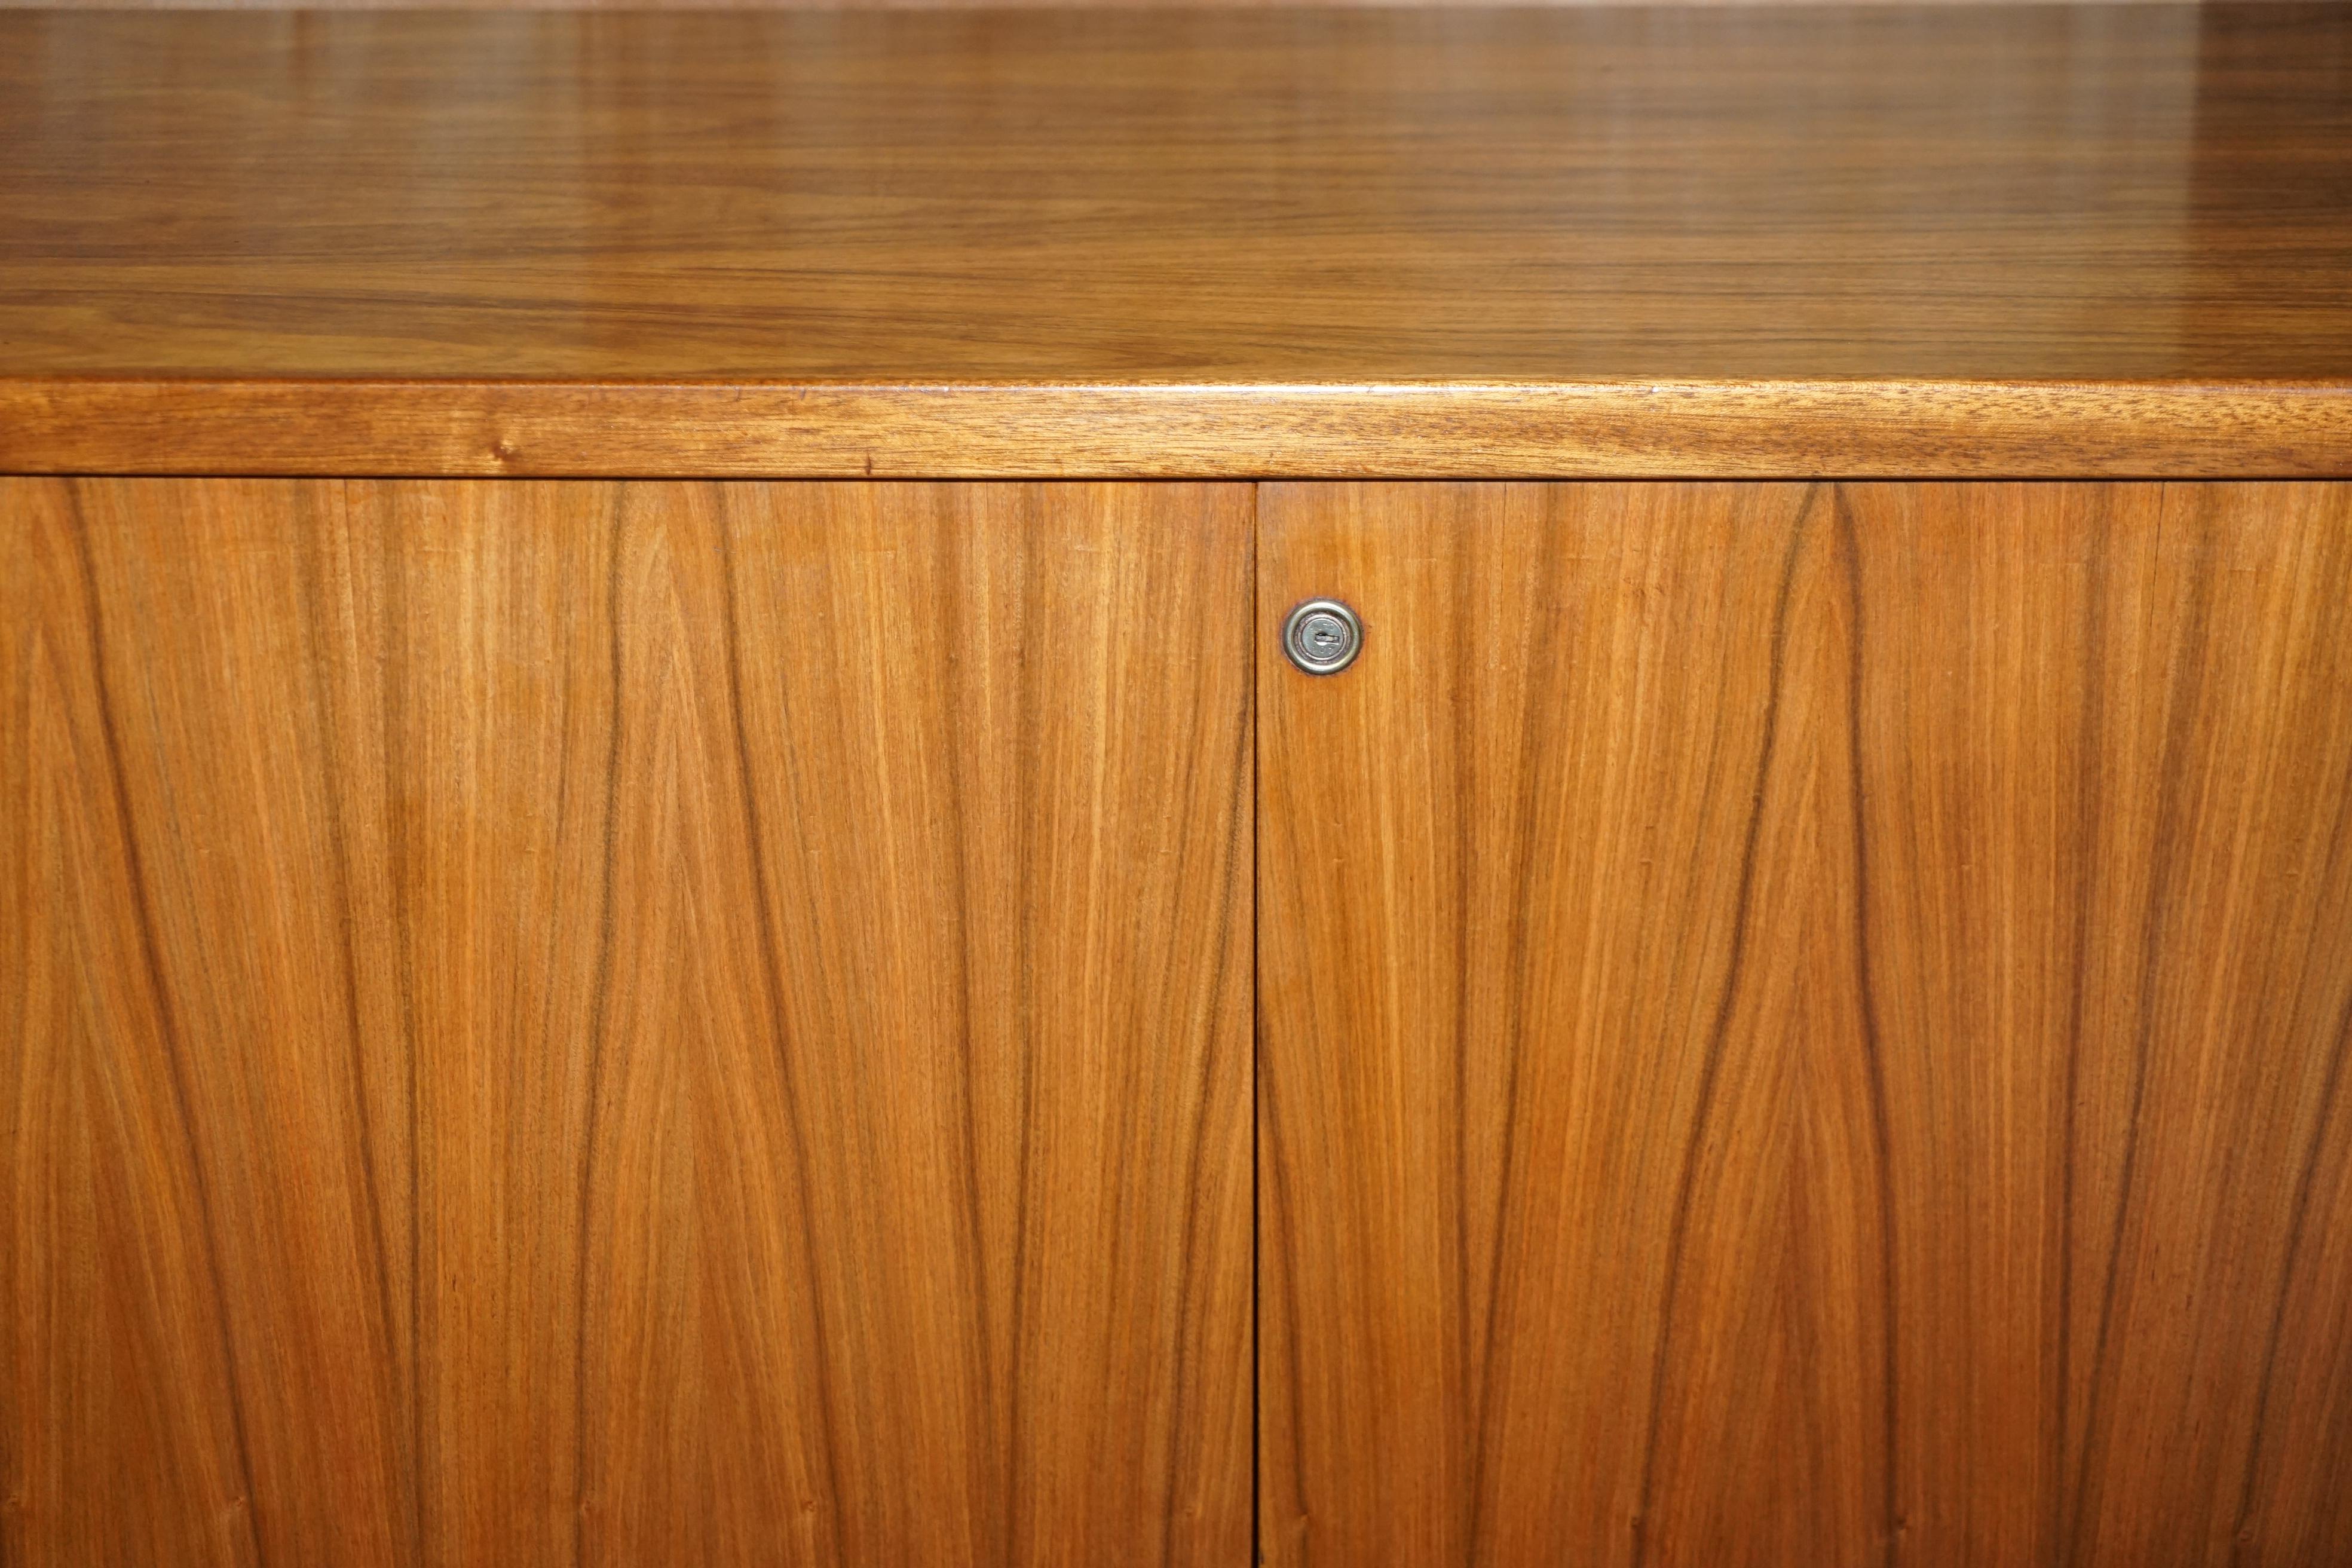 English Stunning Restored Mid Century Modern Period Hardwood Sideboard with Chrome Legs For Sale